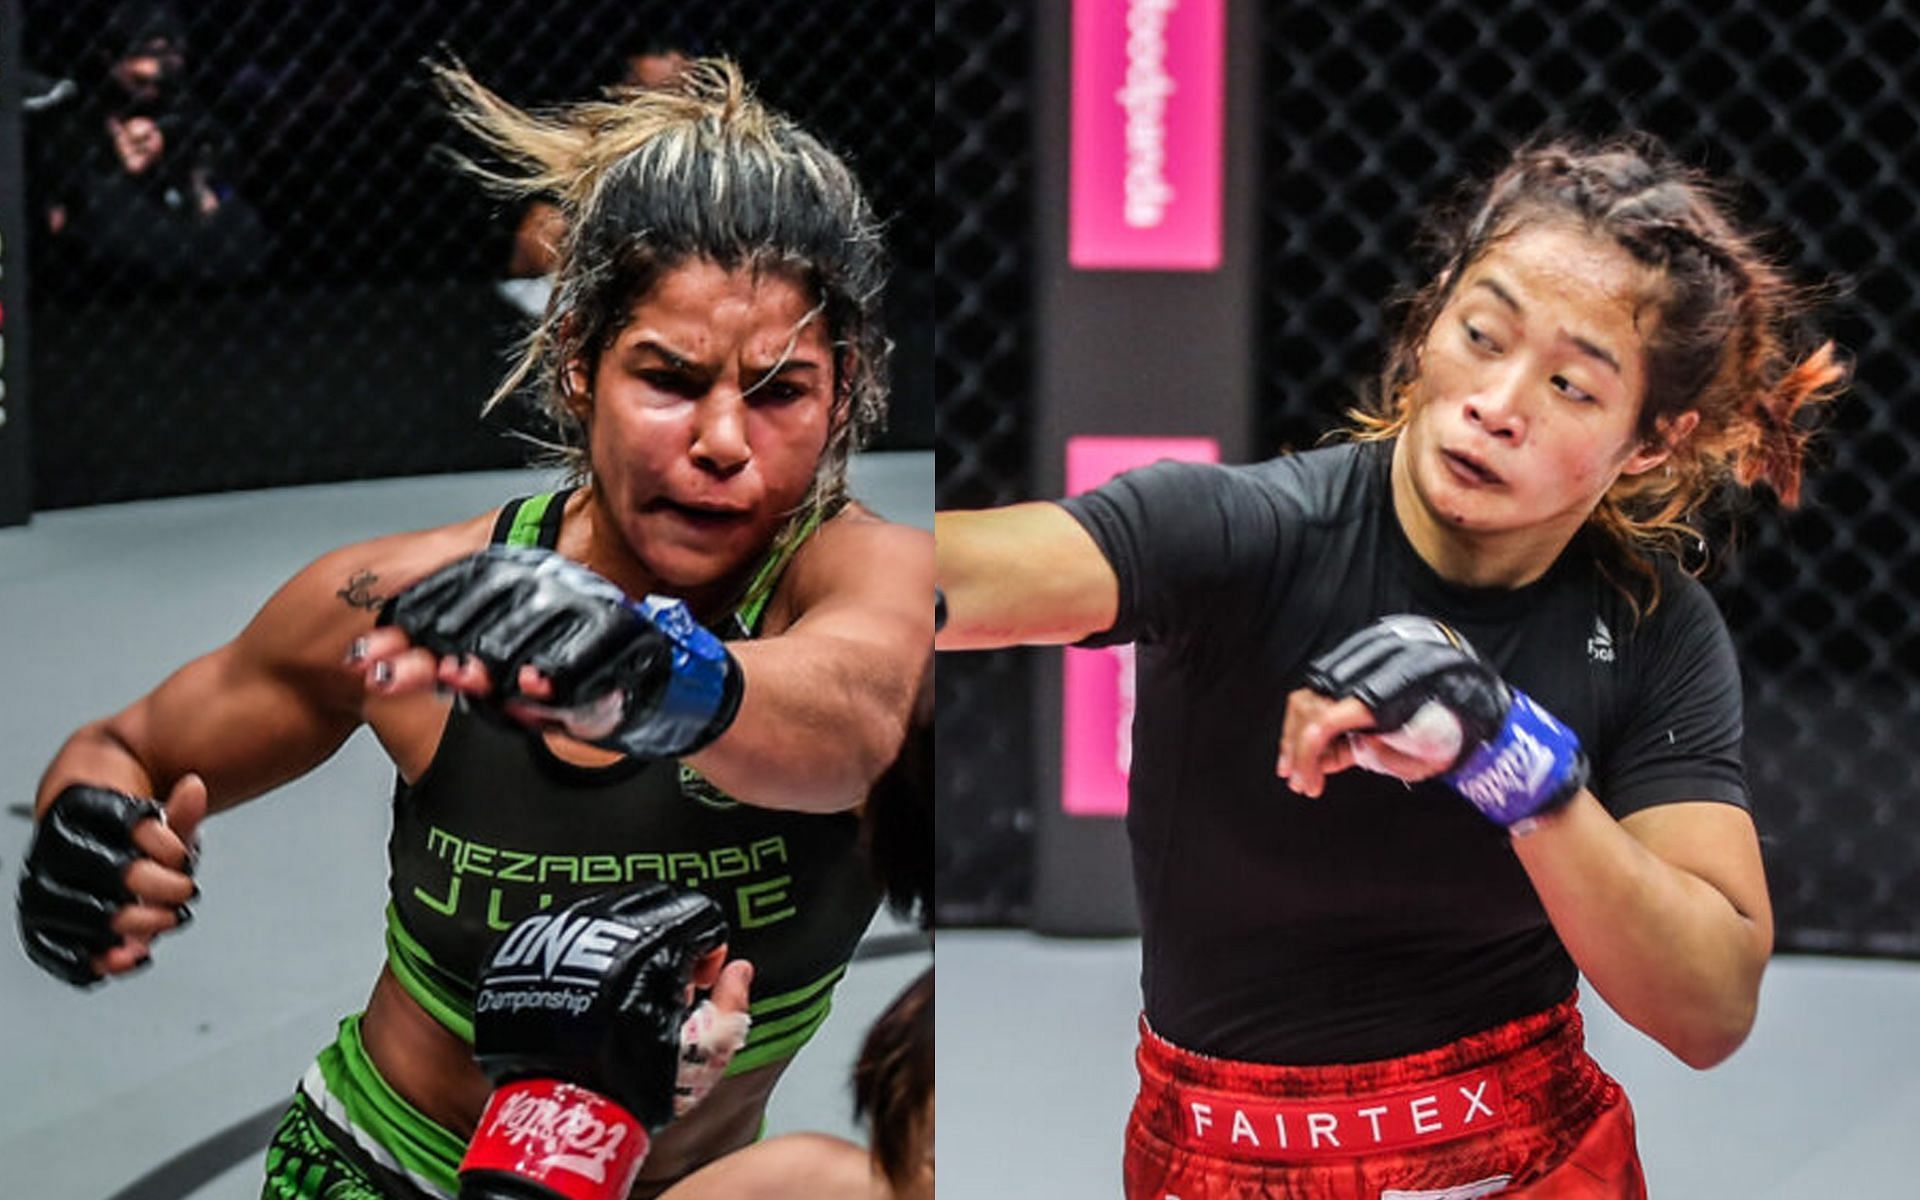 Julie Mezabarba (L) is looking for a knockout victory over Jenelyn Olsim (R) at ONE 158. | [Photos: ONE Championship]